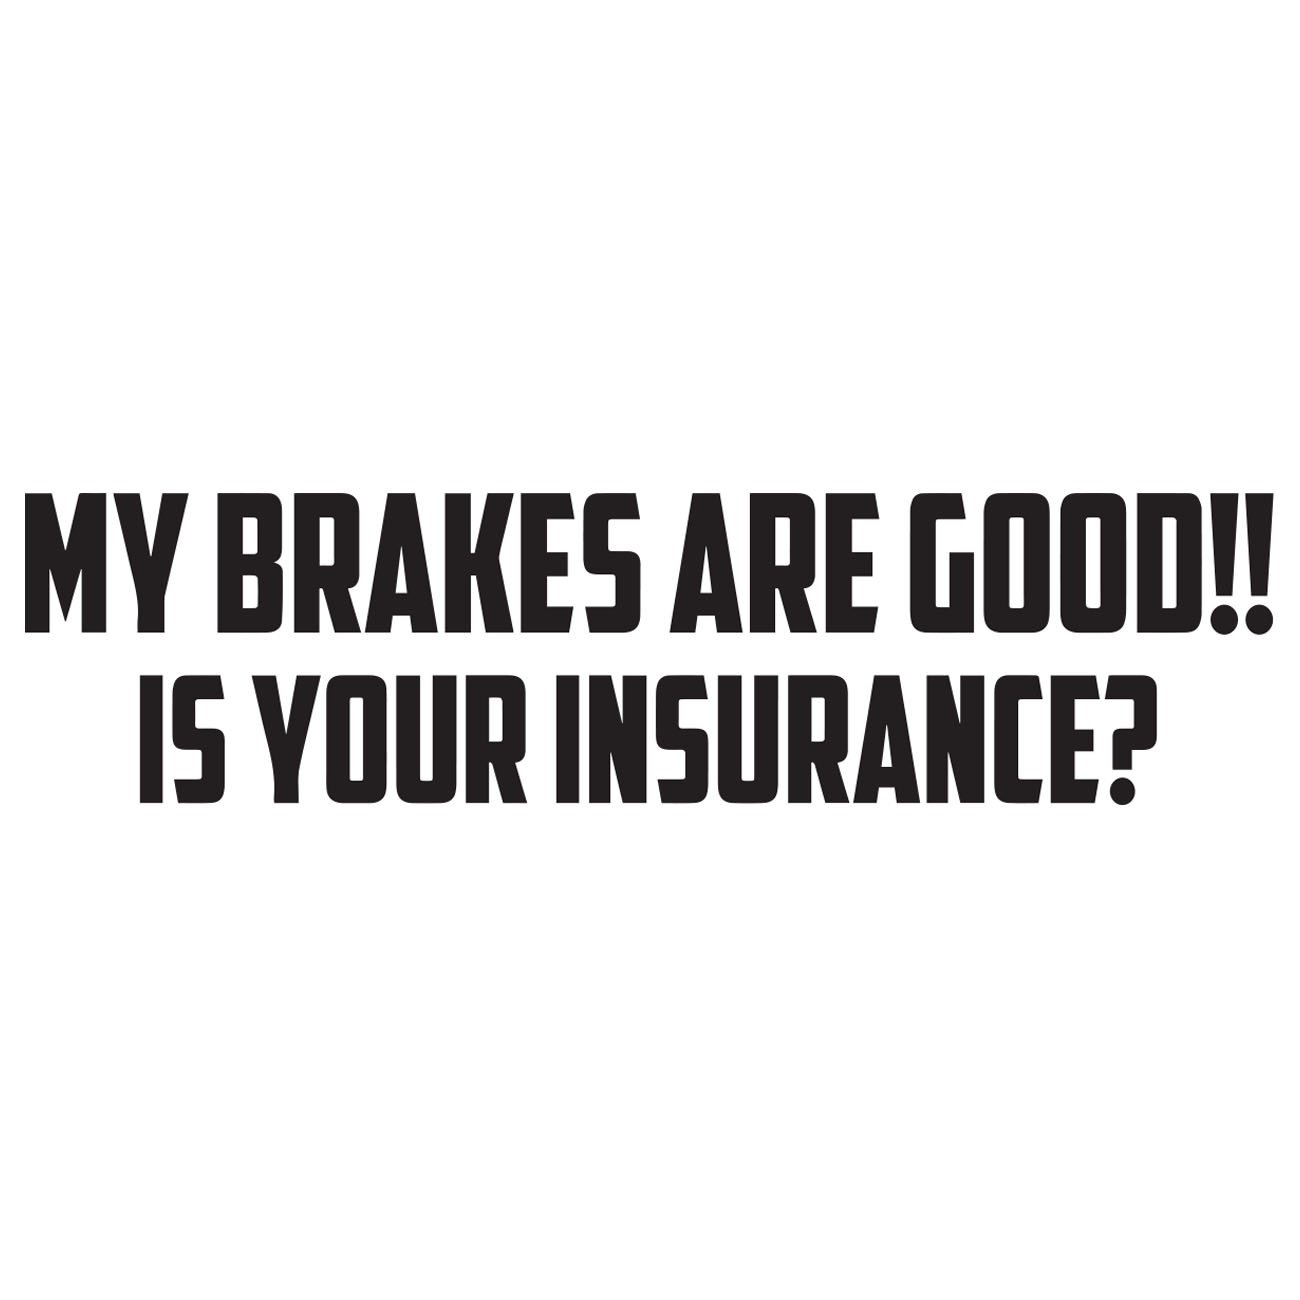 My brakes are good - Is your insurance?